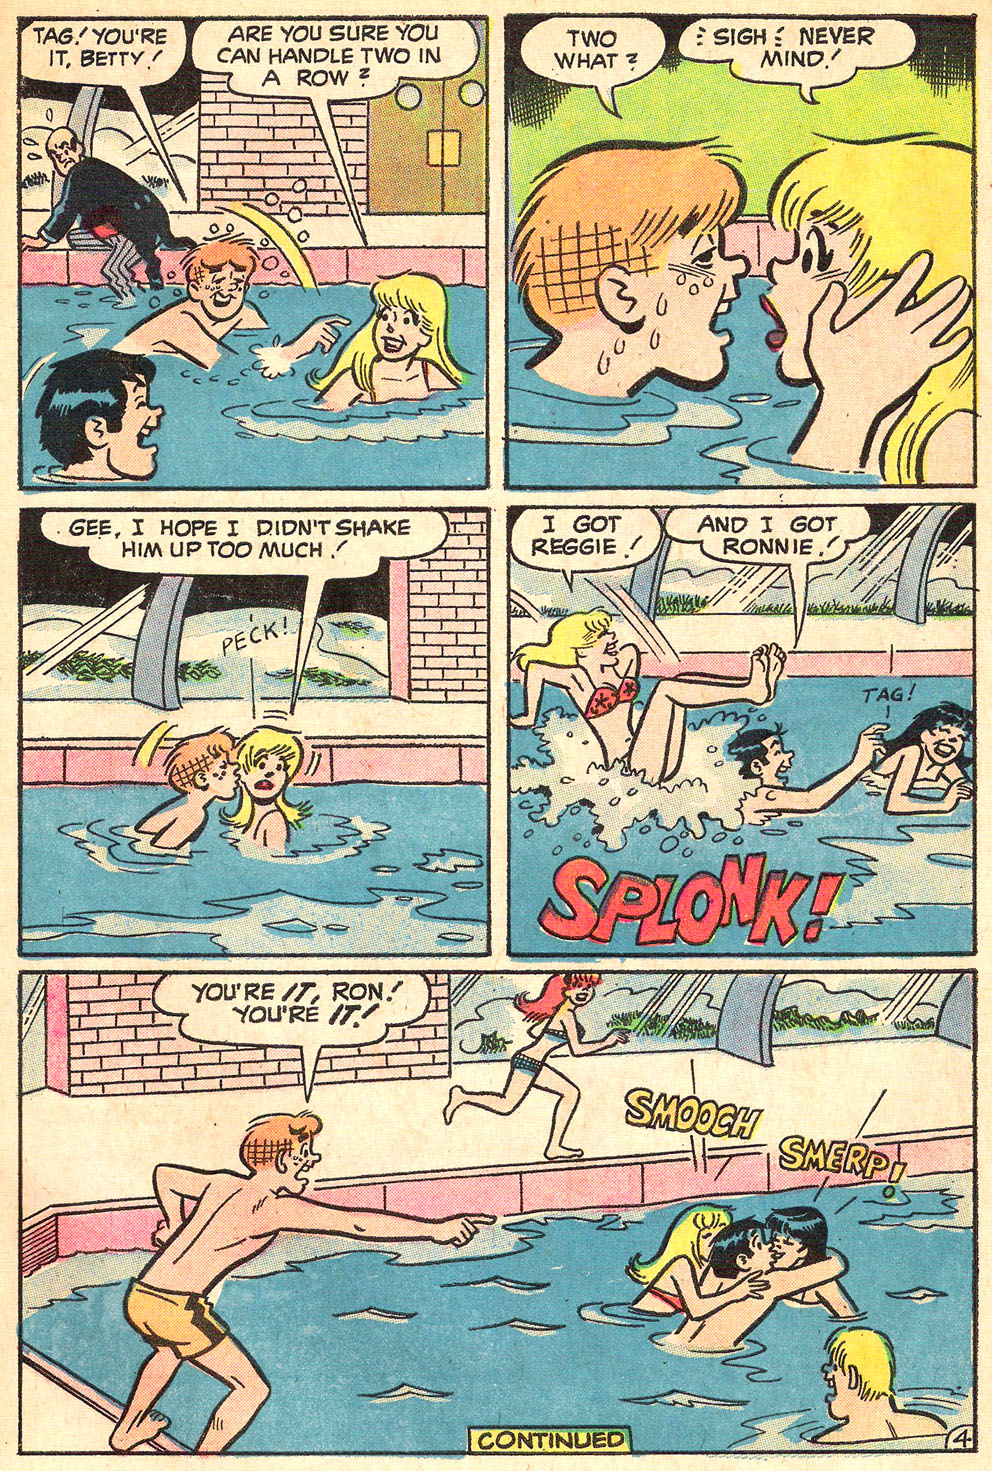 Read online Archie's Girls Betty and Veronica comic -  Issue #195 - 27